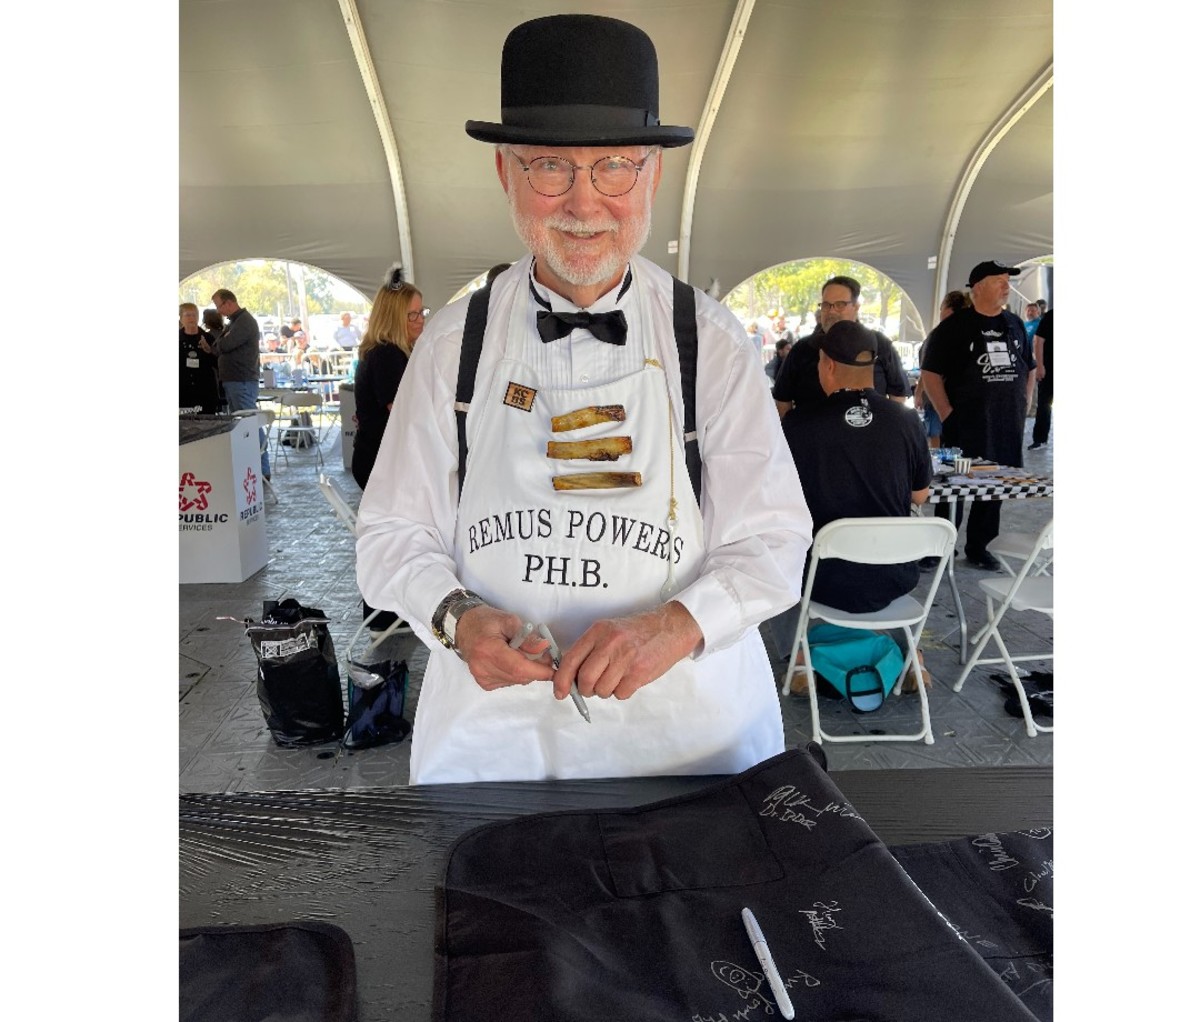 Barbecue judge at the Jack Daniel's BBQ competition.